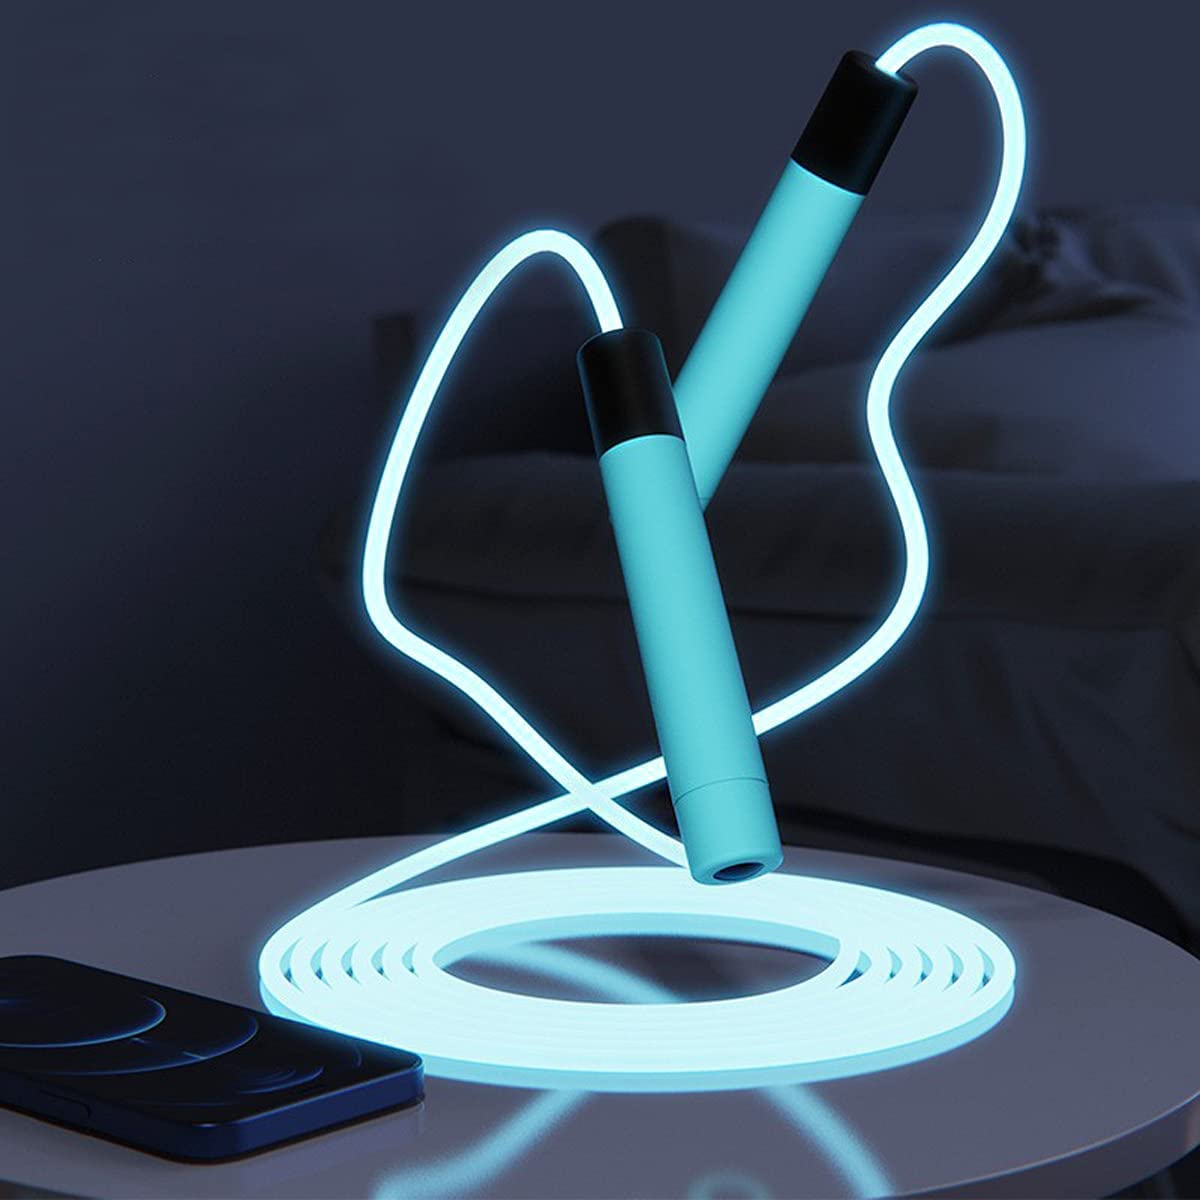 Night Sports Colorful Fitness Training Skipping Glow In The Dark Kid Led Jumprope Gift For Kids And Adult Led Jump Rope Skipping